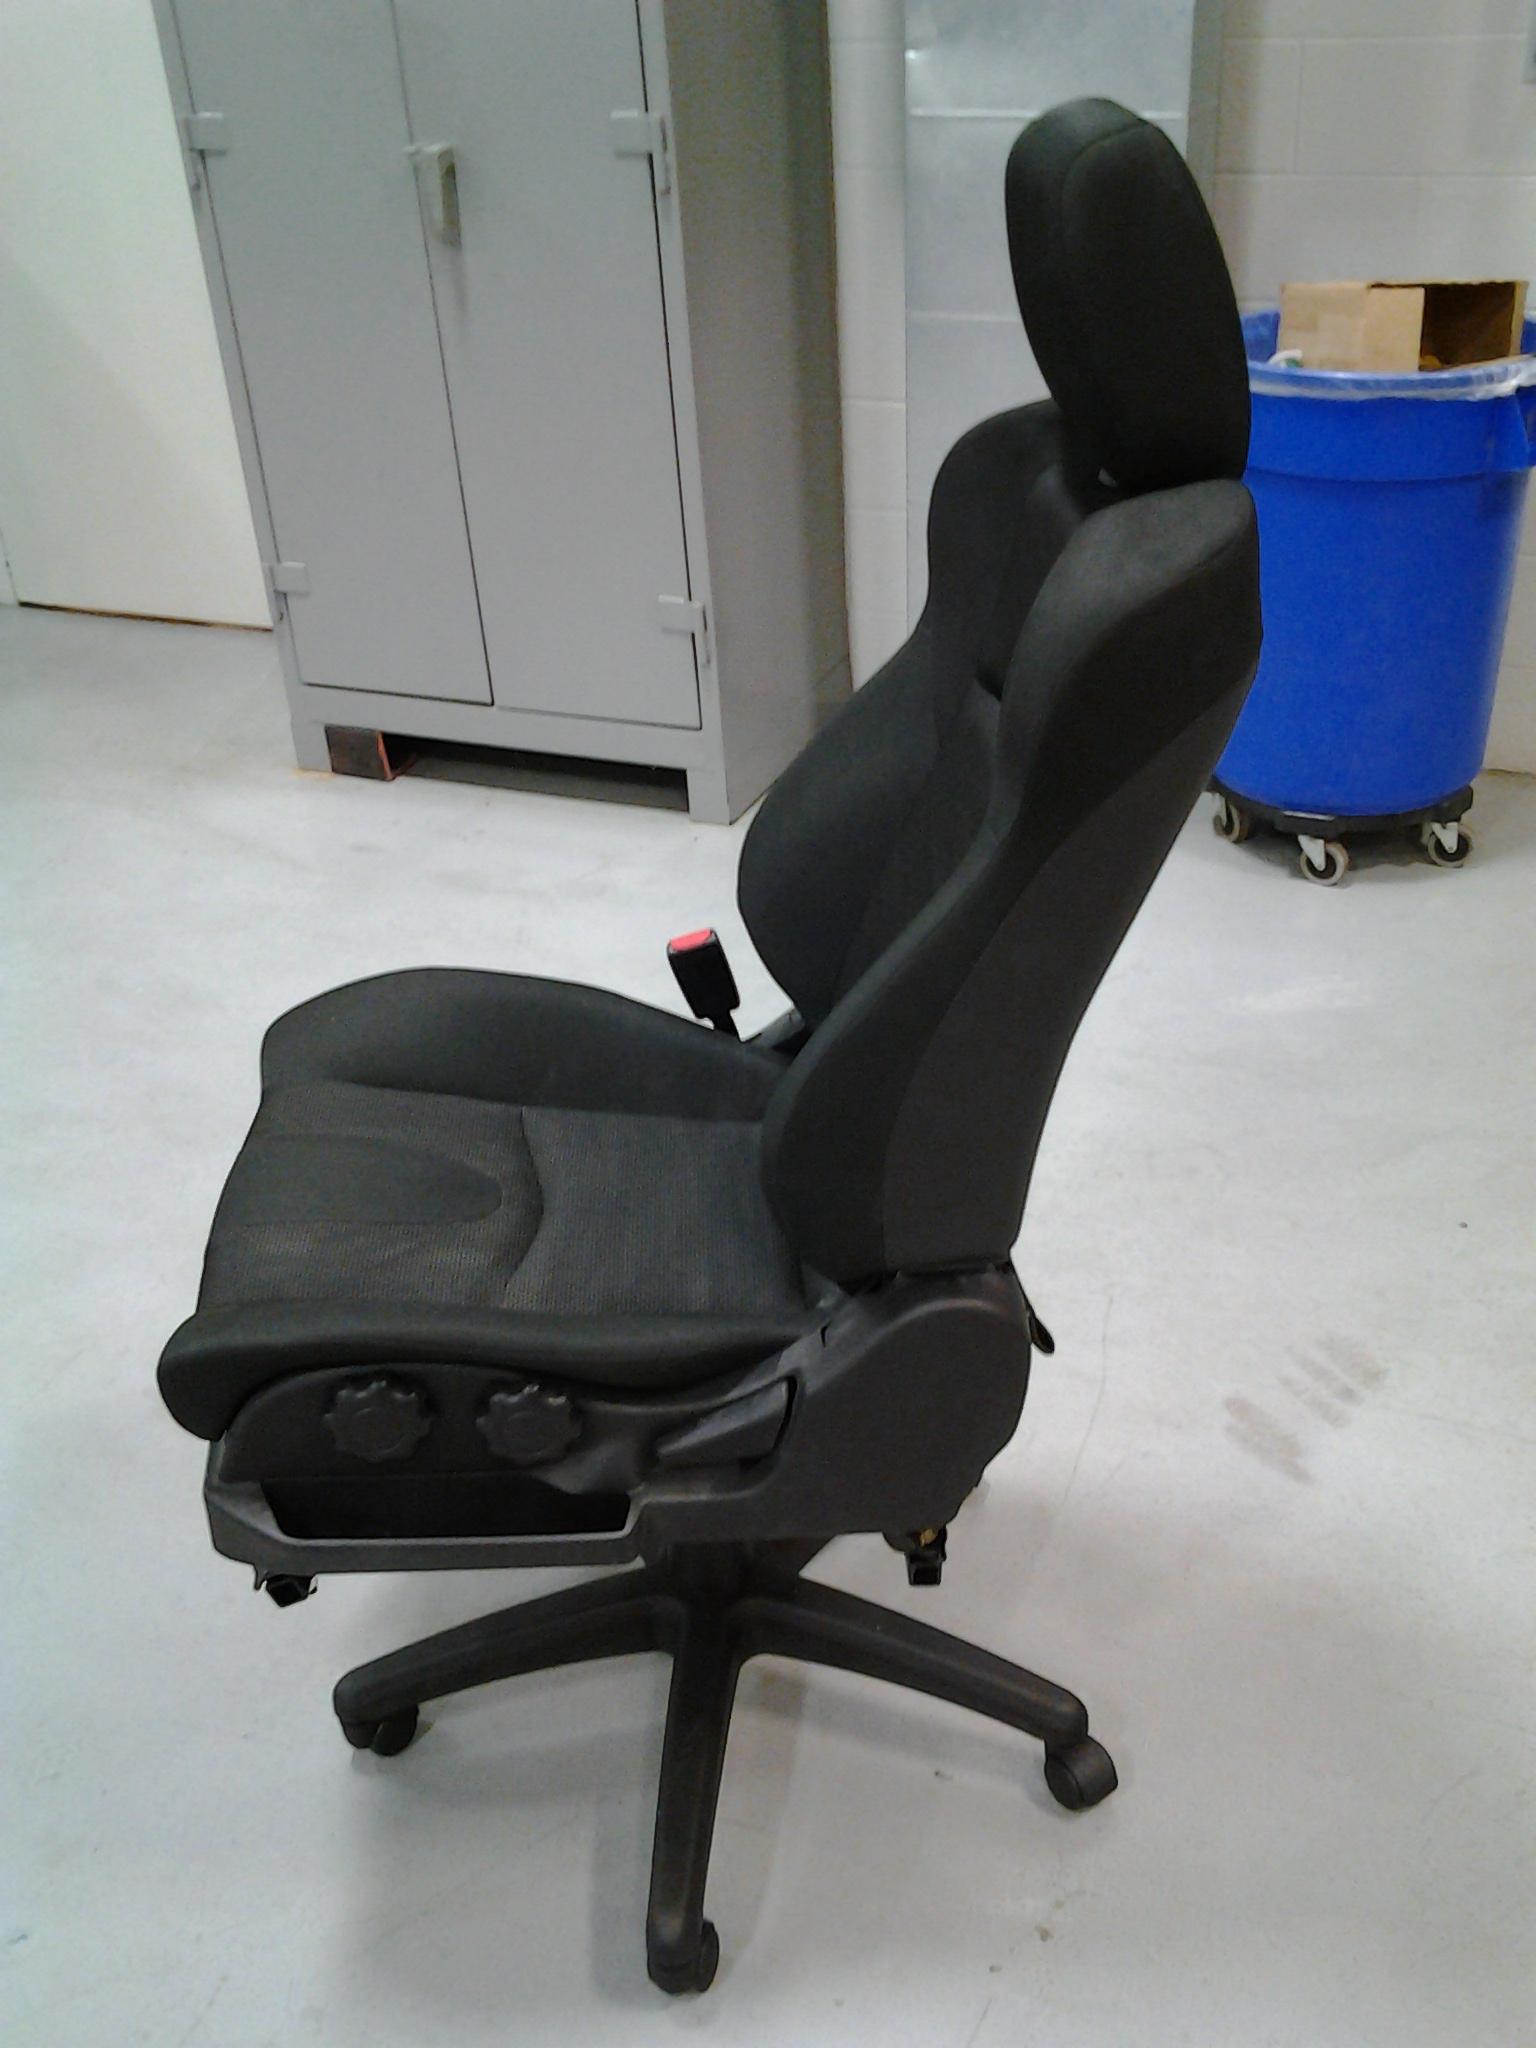 Car Seat As A Chair Audi A8 Seat Page 2 H Ard Forum